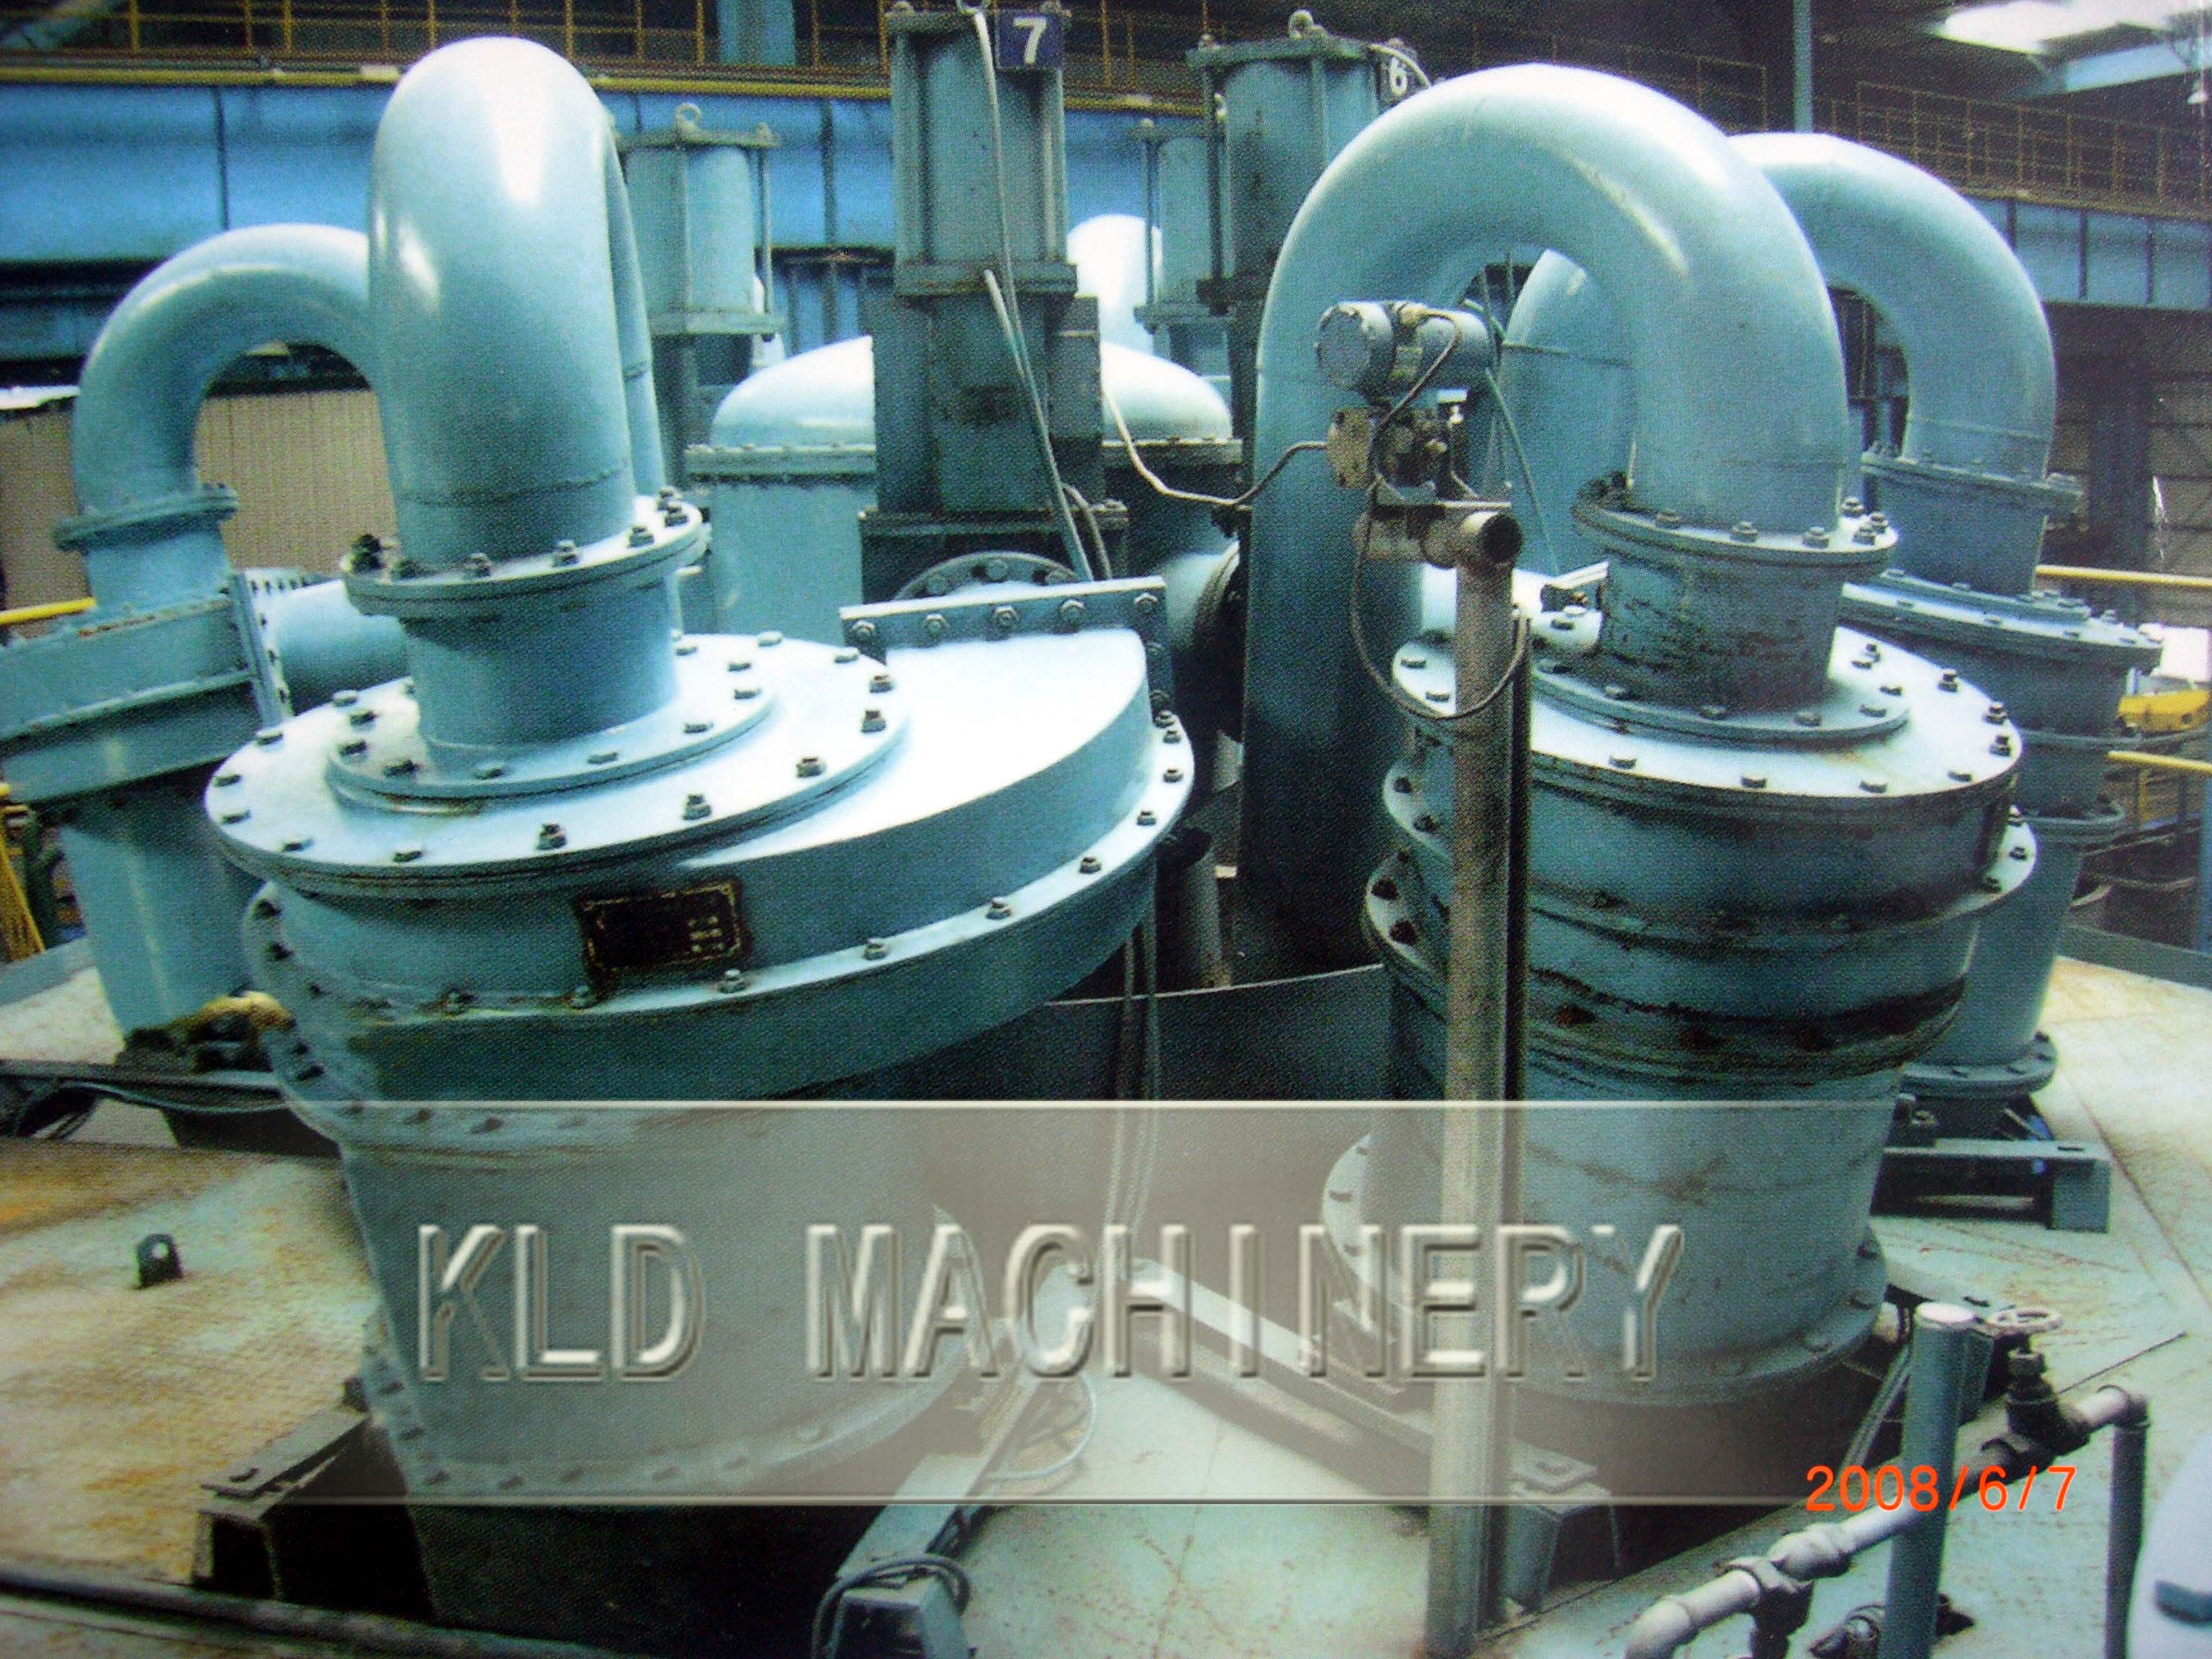   Technical Advantages of Industrial Mill